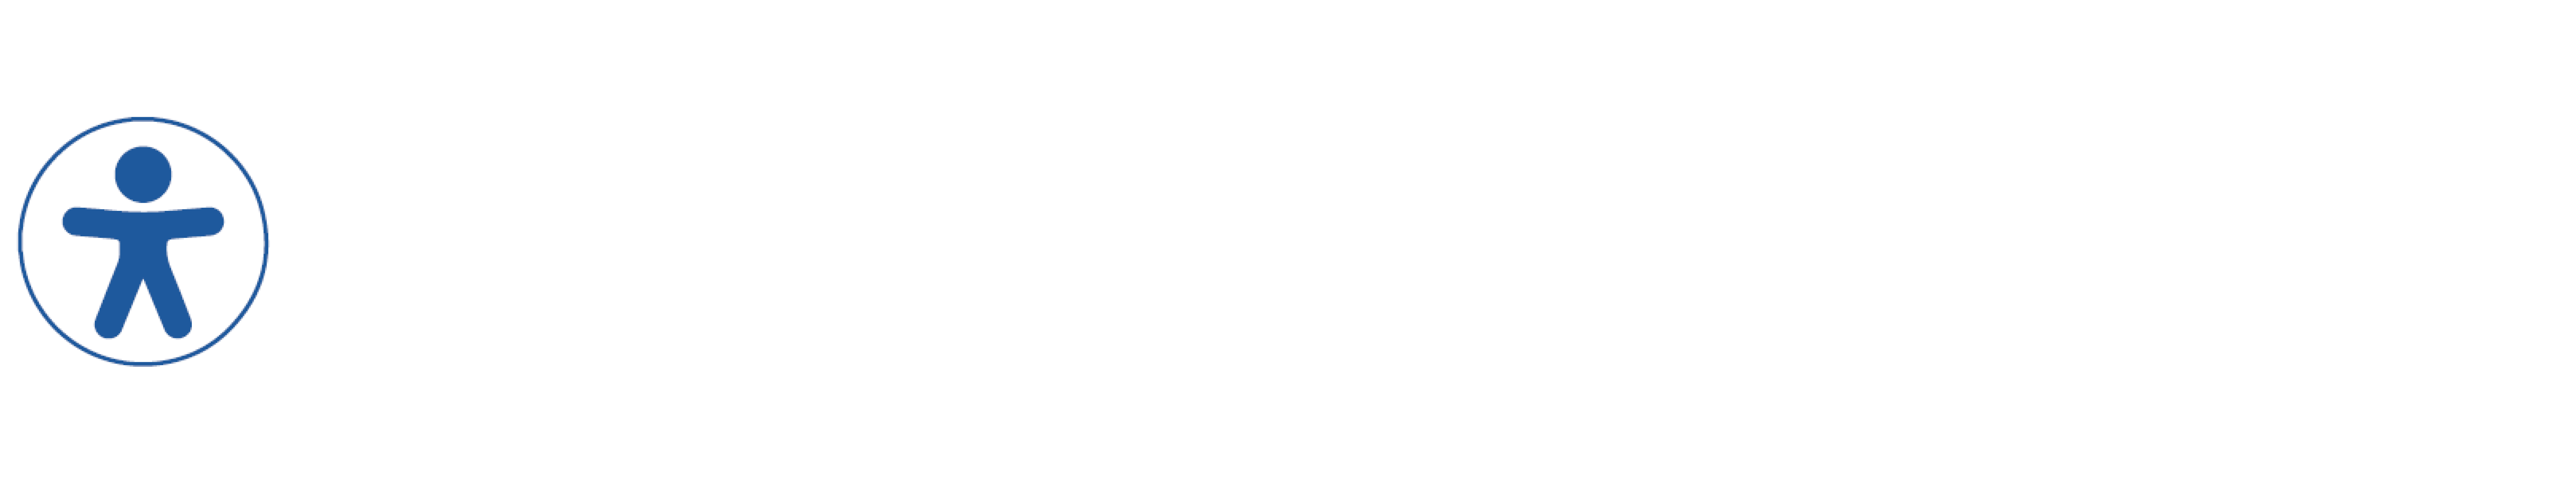 Audited & Certified for accessibility & usability by disabled testers